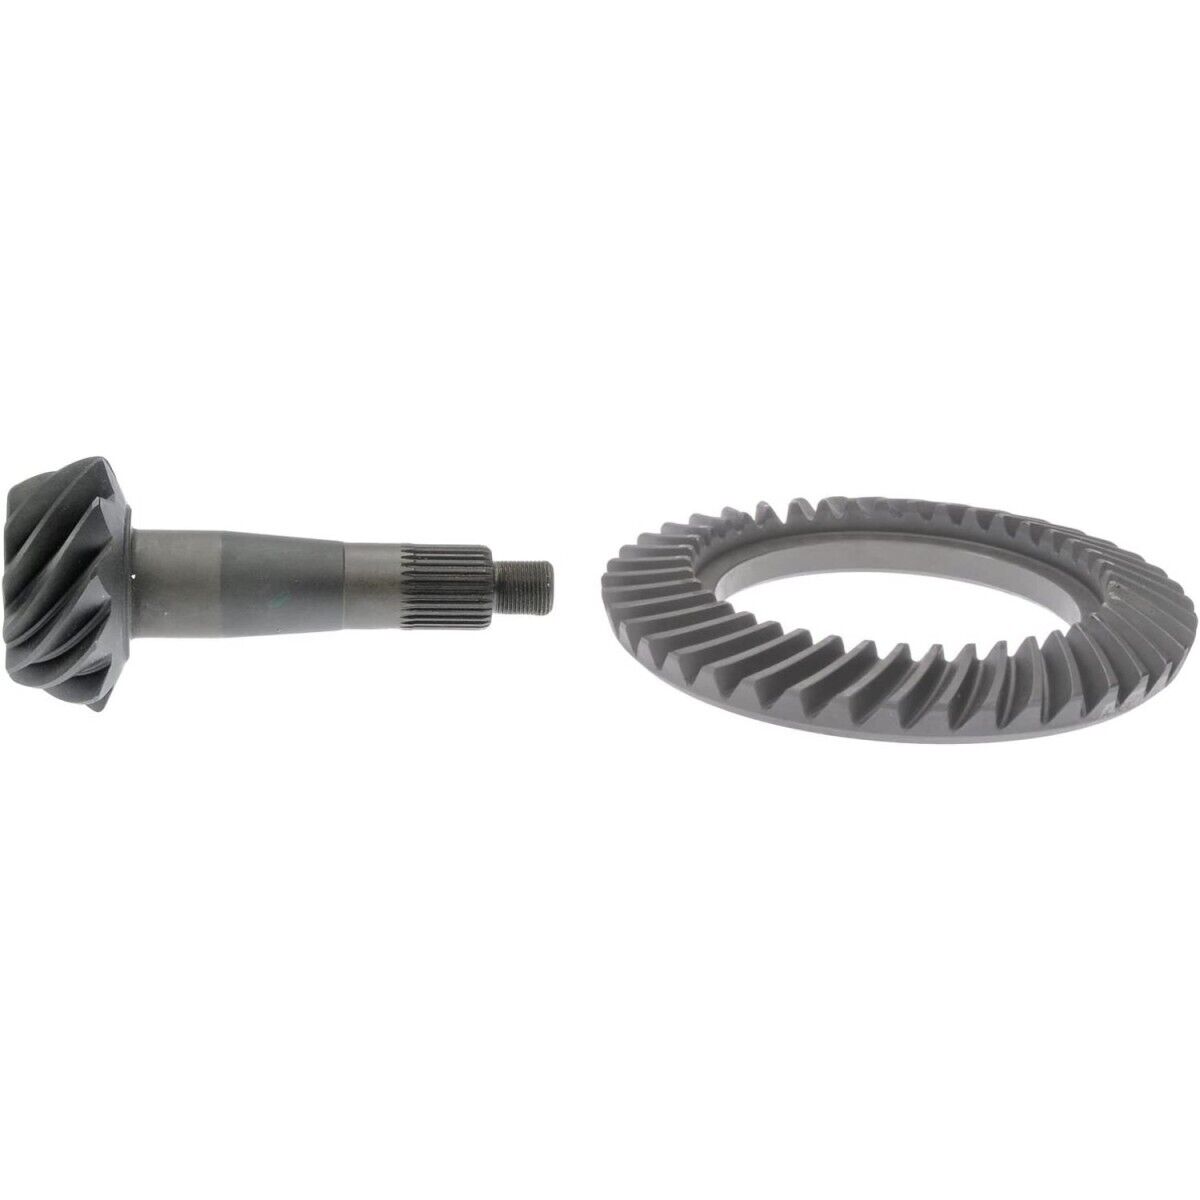 697-138 Dorman Kit Ring and Pinion Rear for Chevy Chevrolet El Camino Chevelle